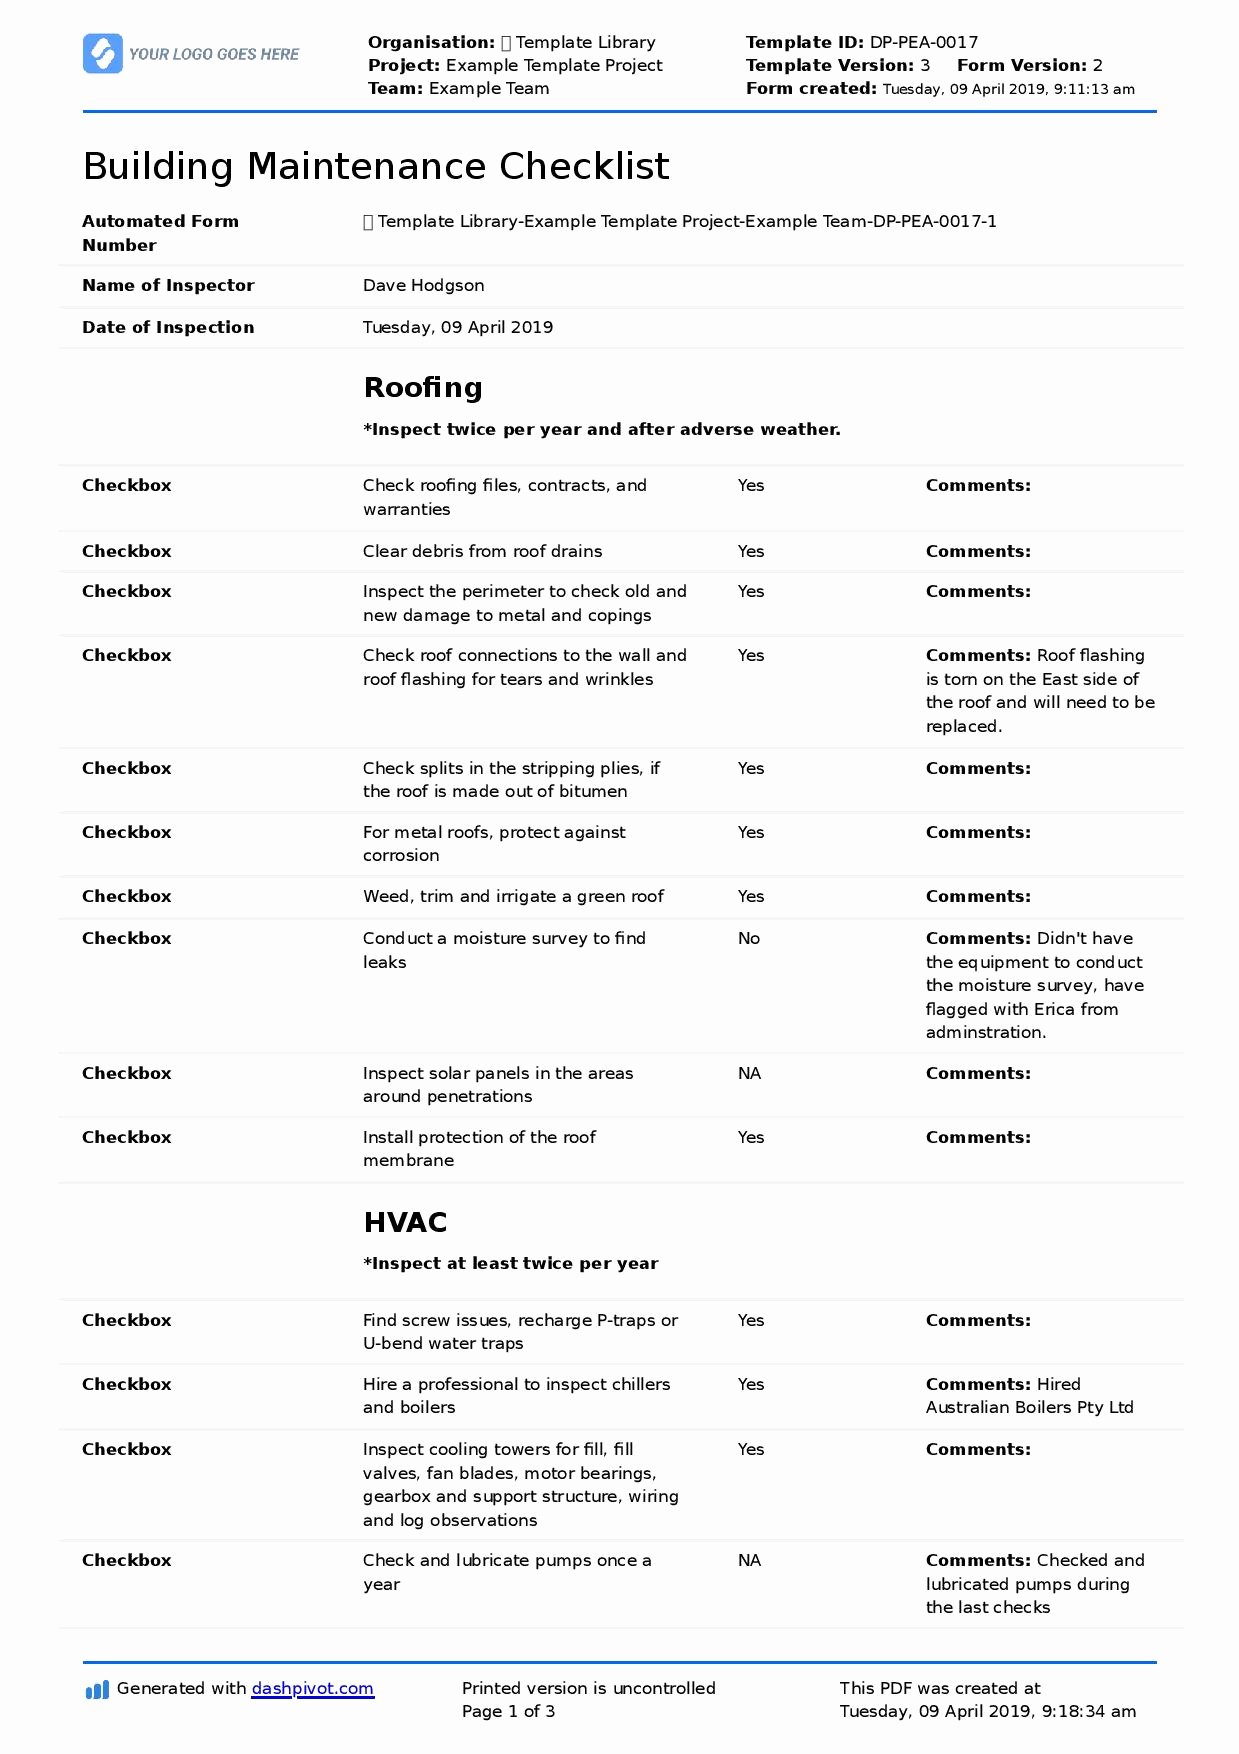 Inspection Checklist Template Excel Awesome Free Building Maintenance Checklist Better Than Pdf